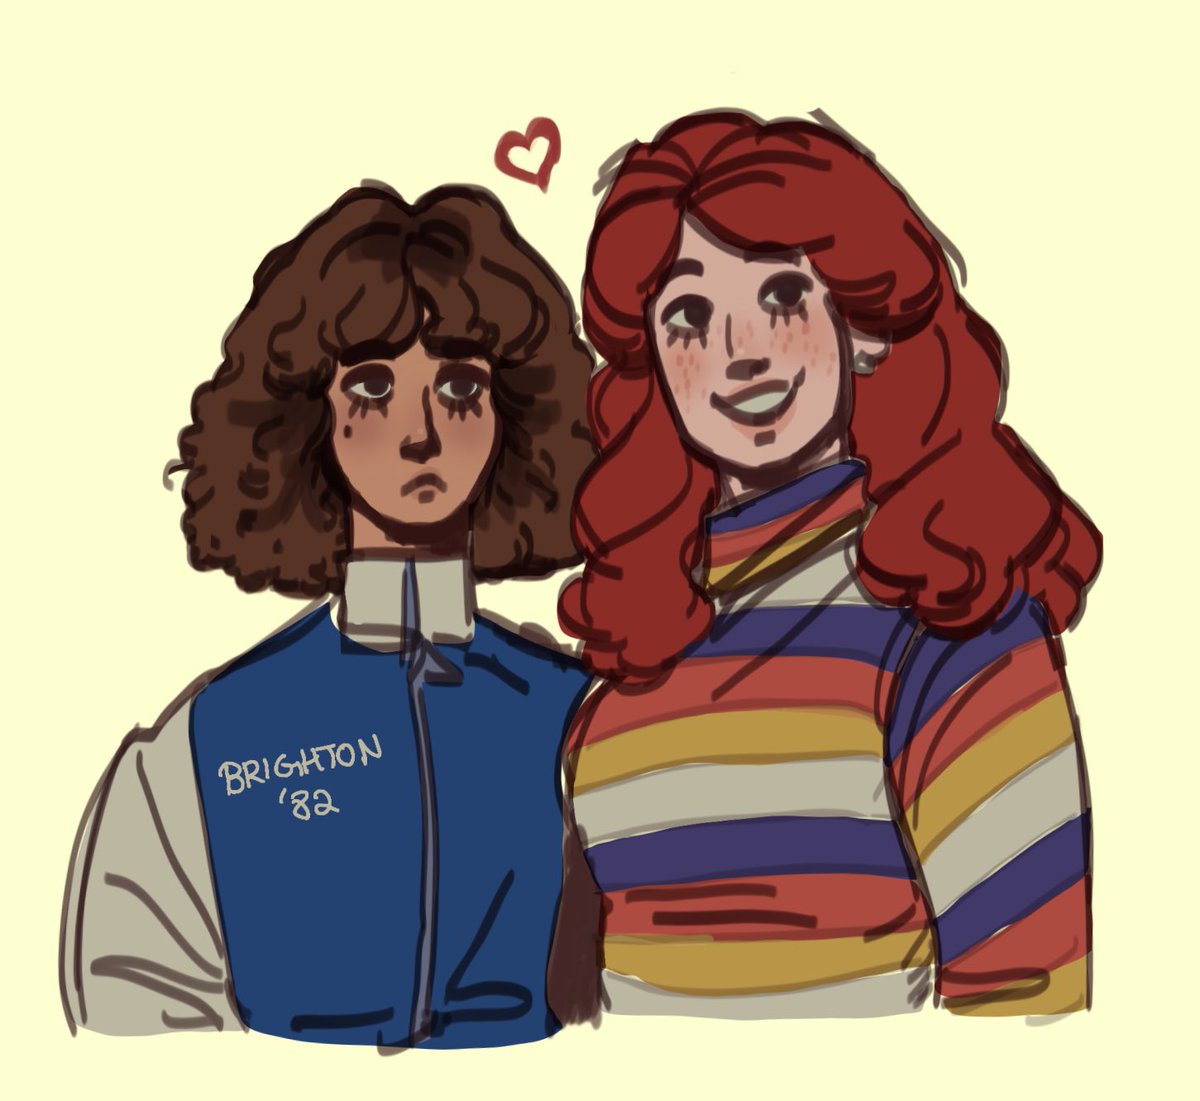 RT @AltFenn: im super tired . but heres sophie and jenny from the walten files :) <3 https://t.co/FuUtYqYYuJ